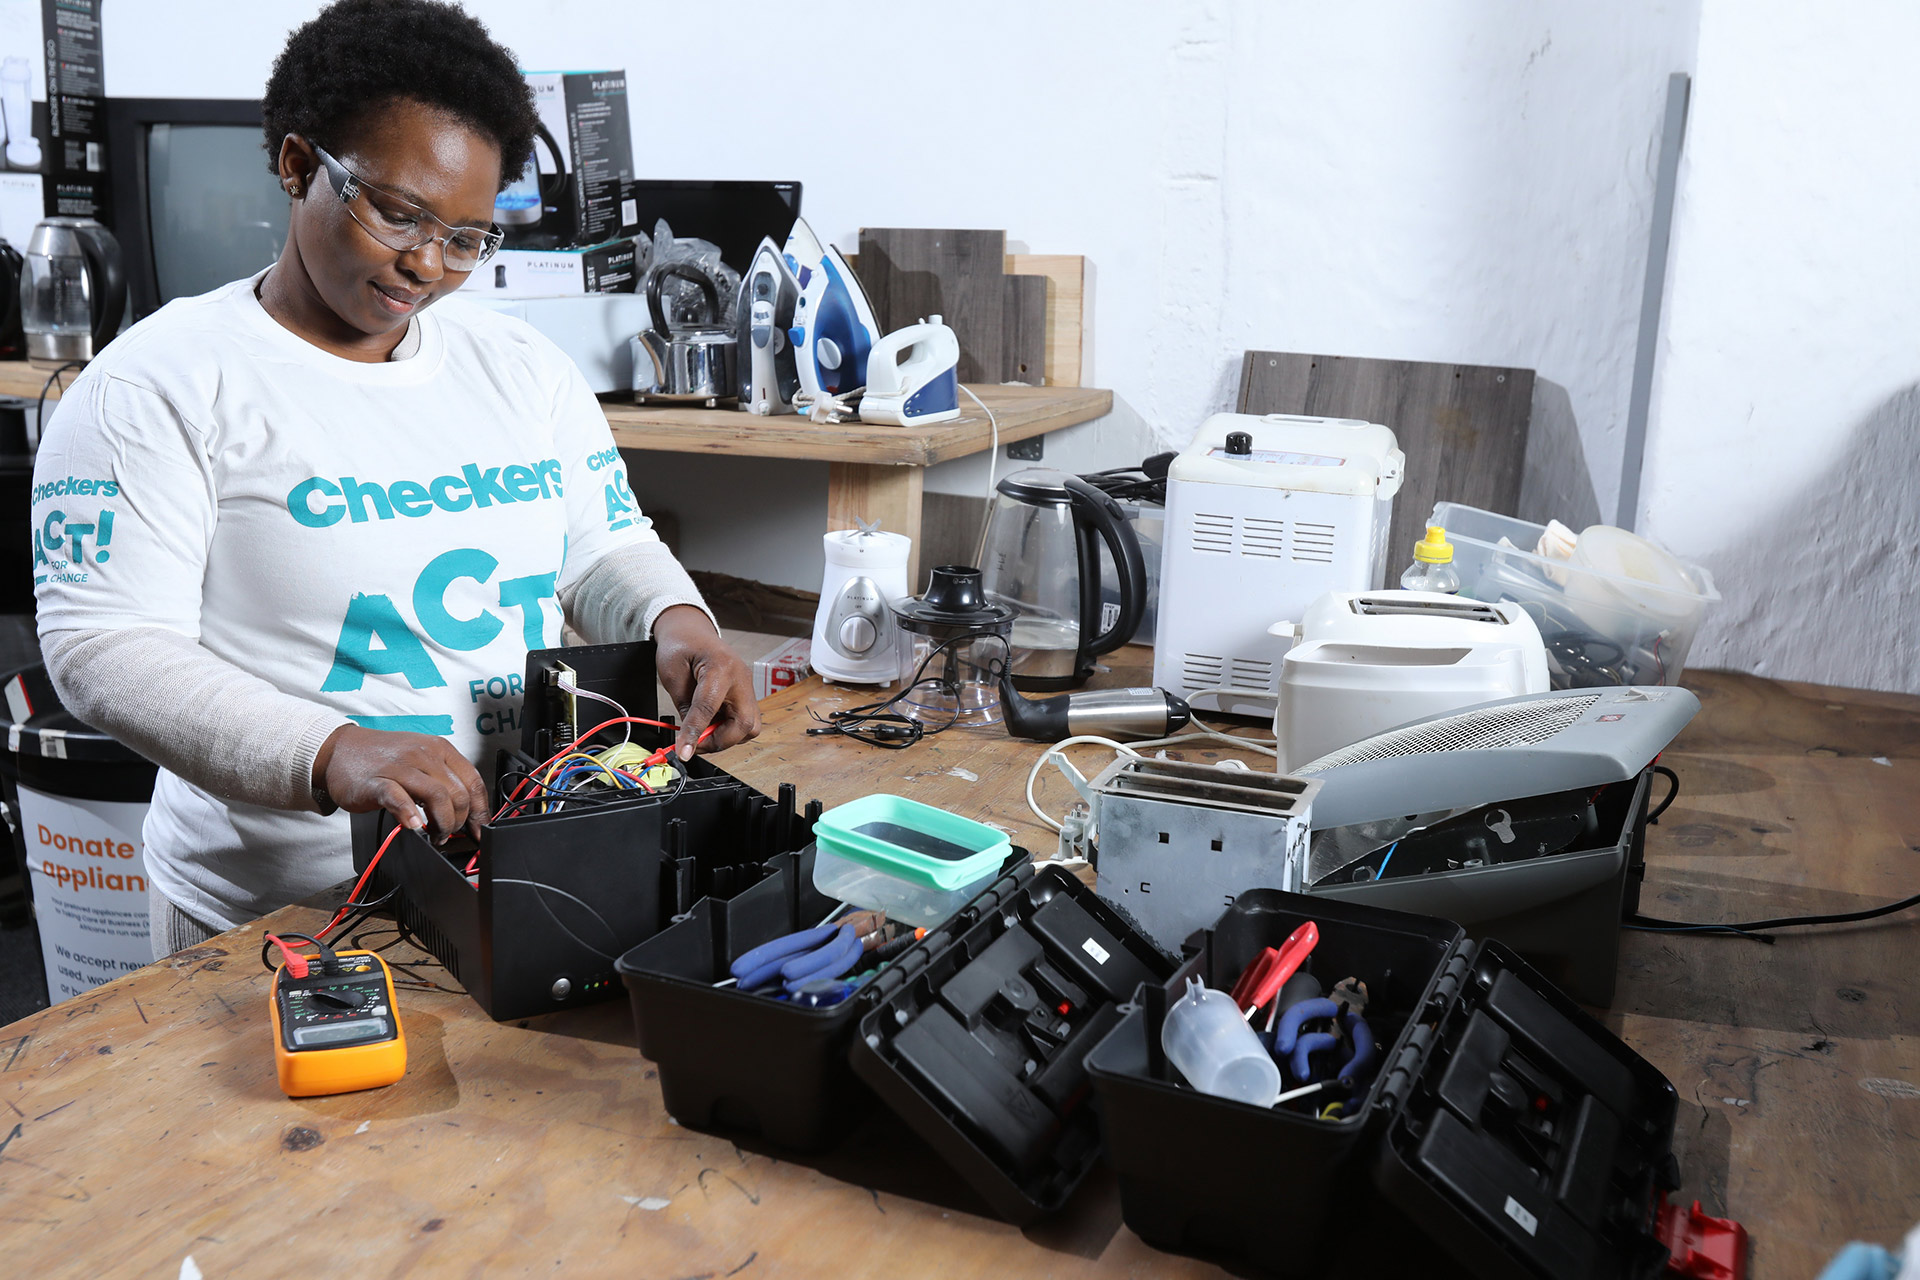 From Hardship to Hope: Appliance repair programme uplifts unemployed mother in Eastern Cape